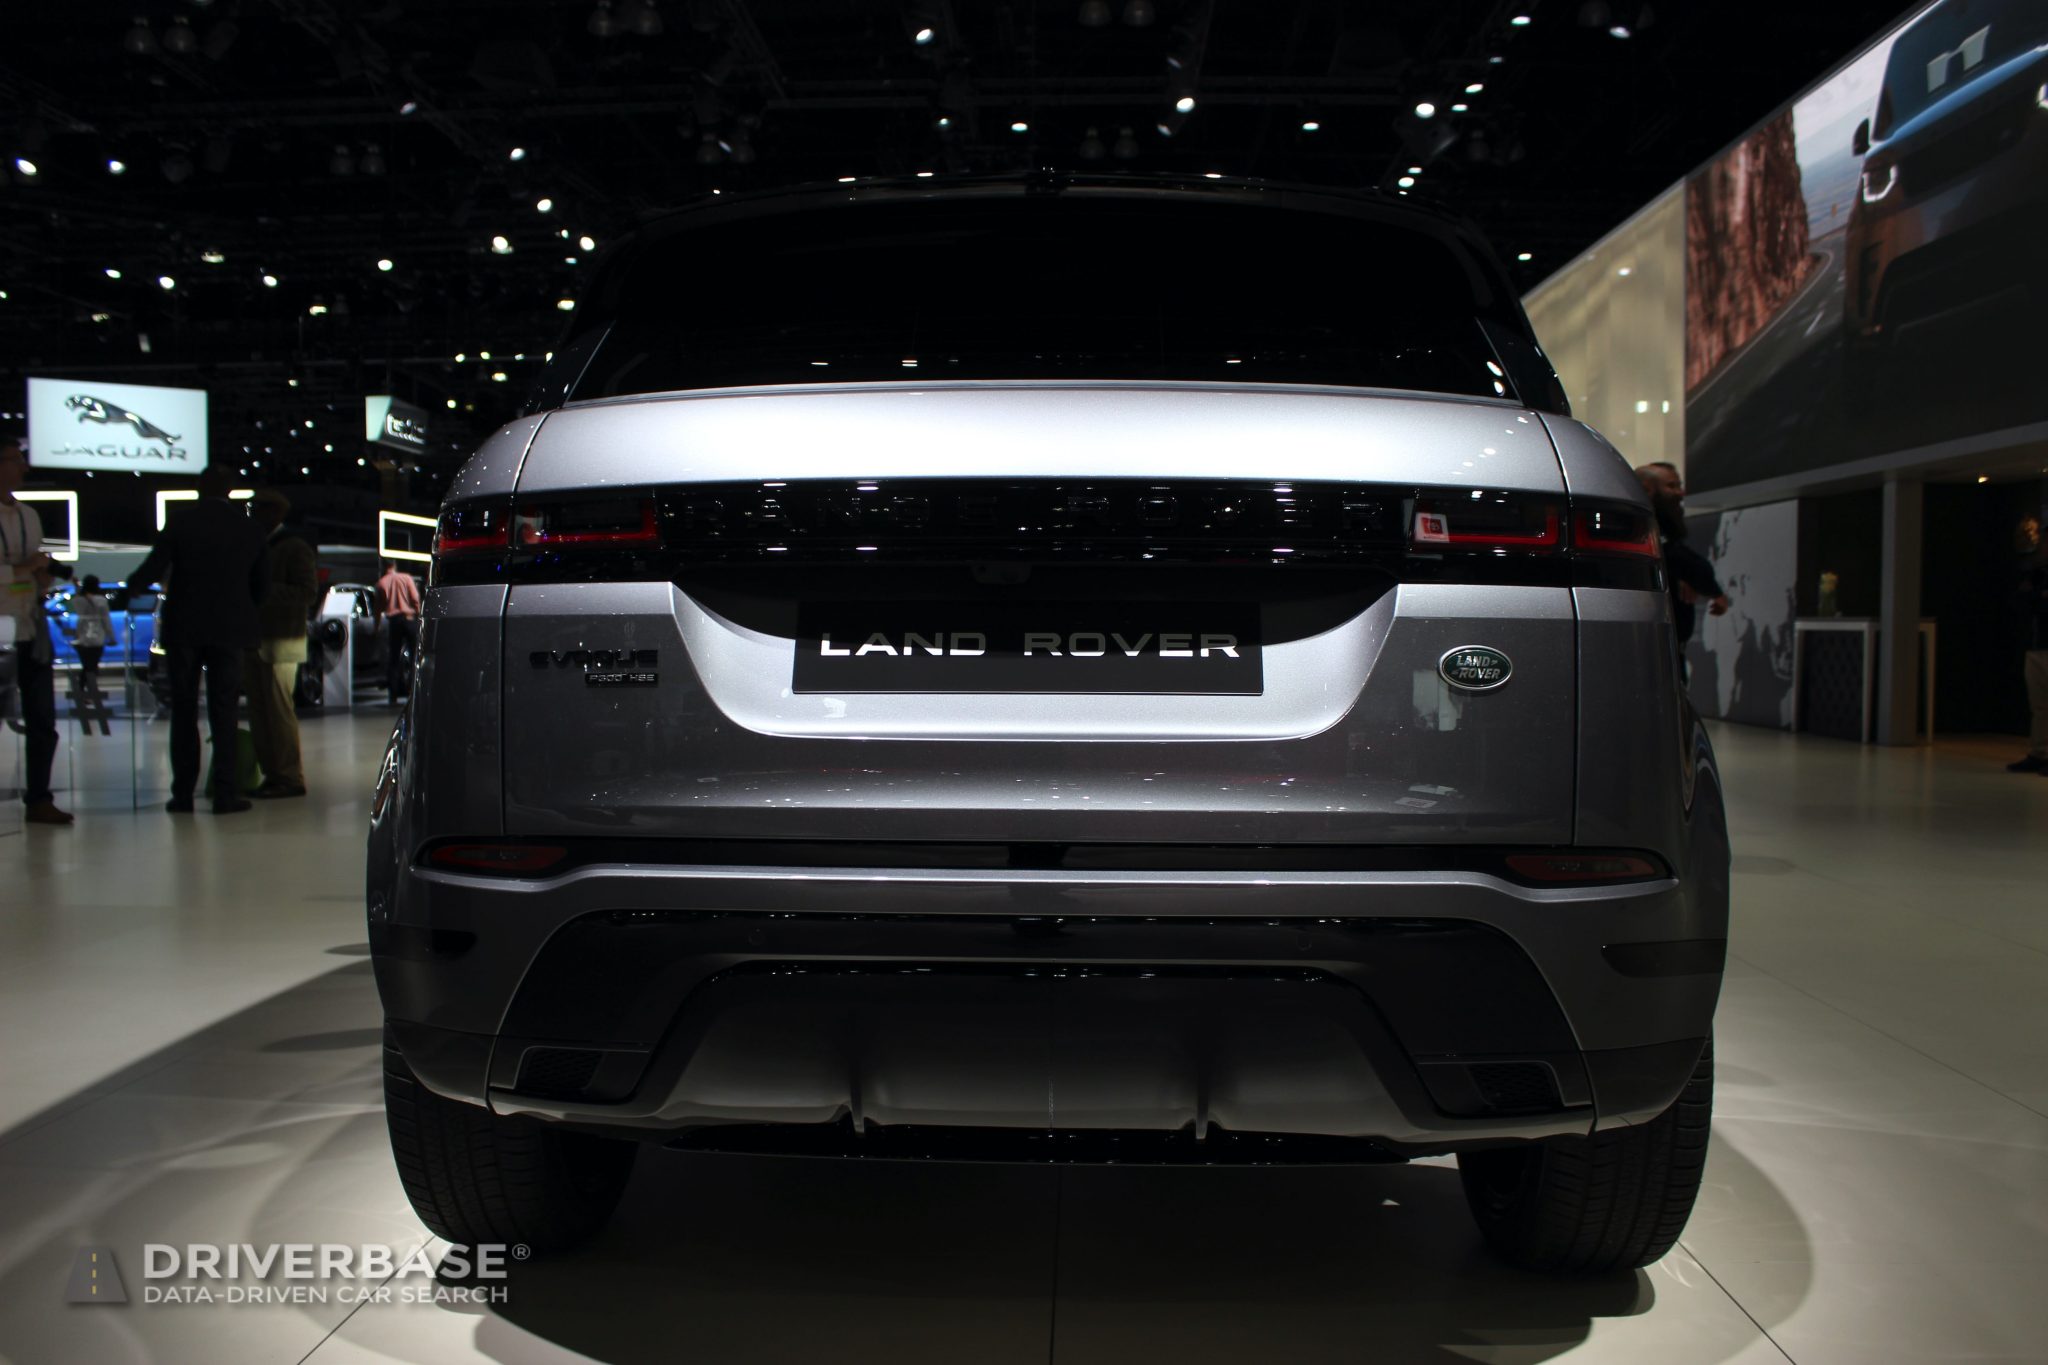 2020 Land Rover Range Rover Evoque at the 2019 Los Angeles Auto Show